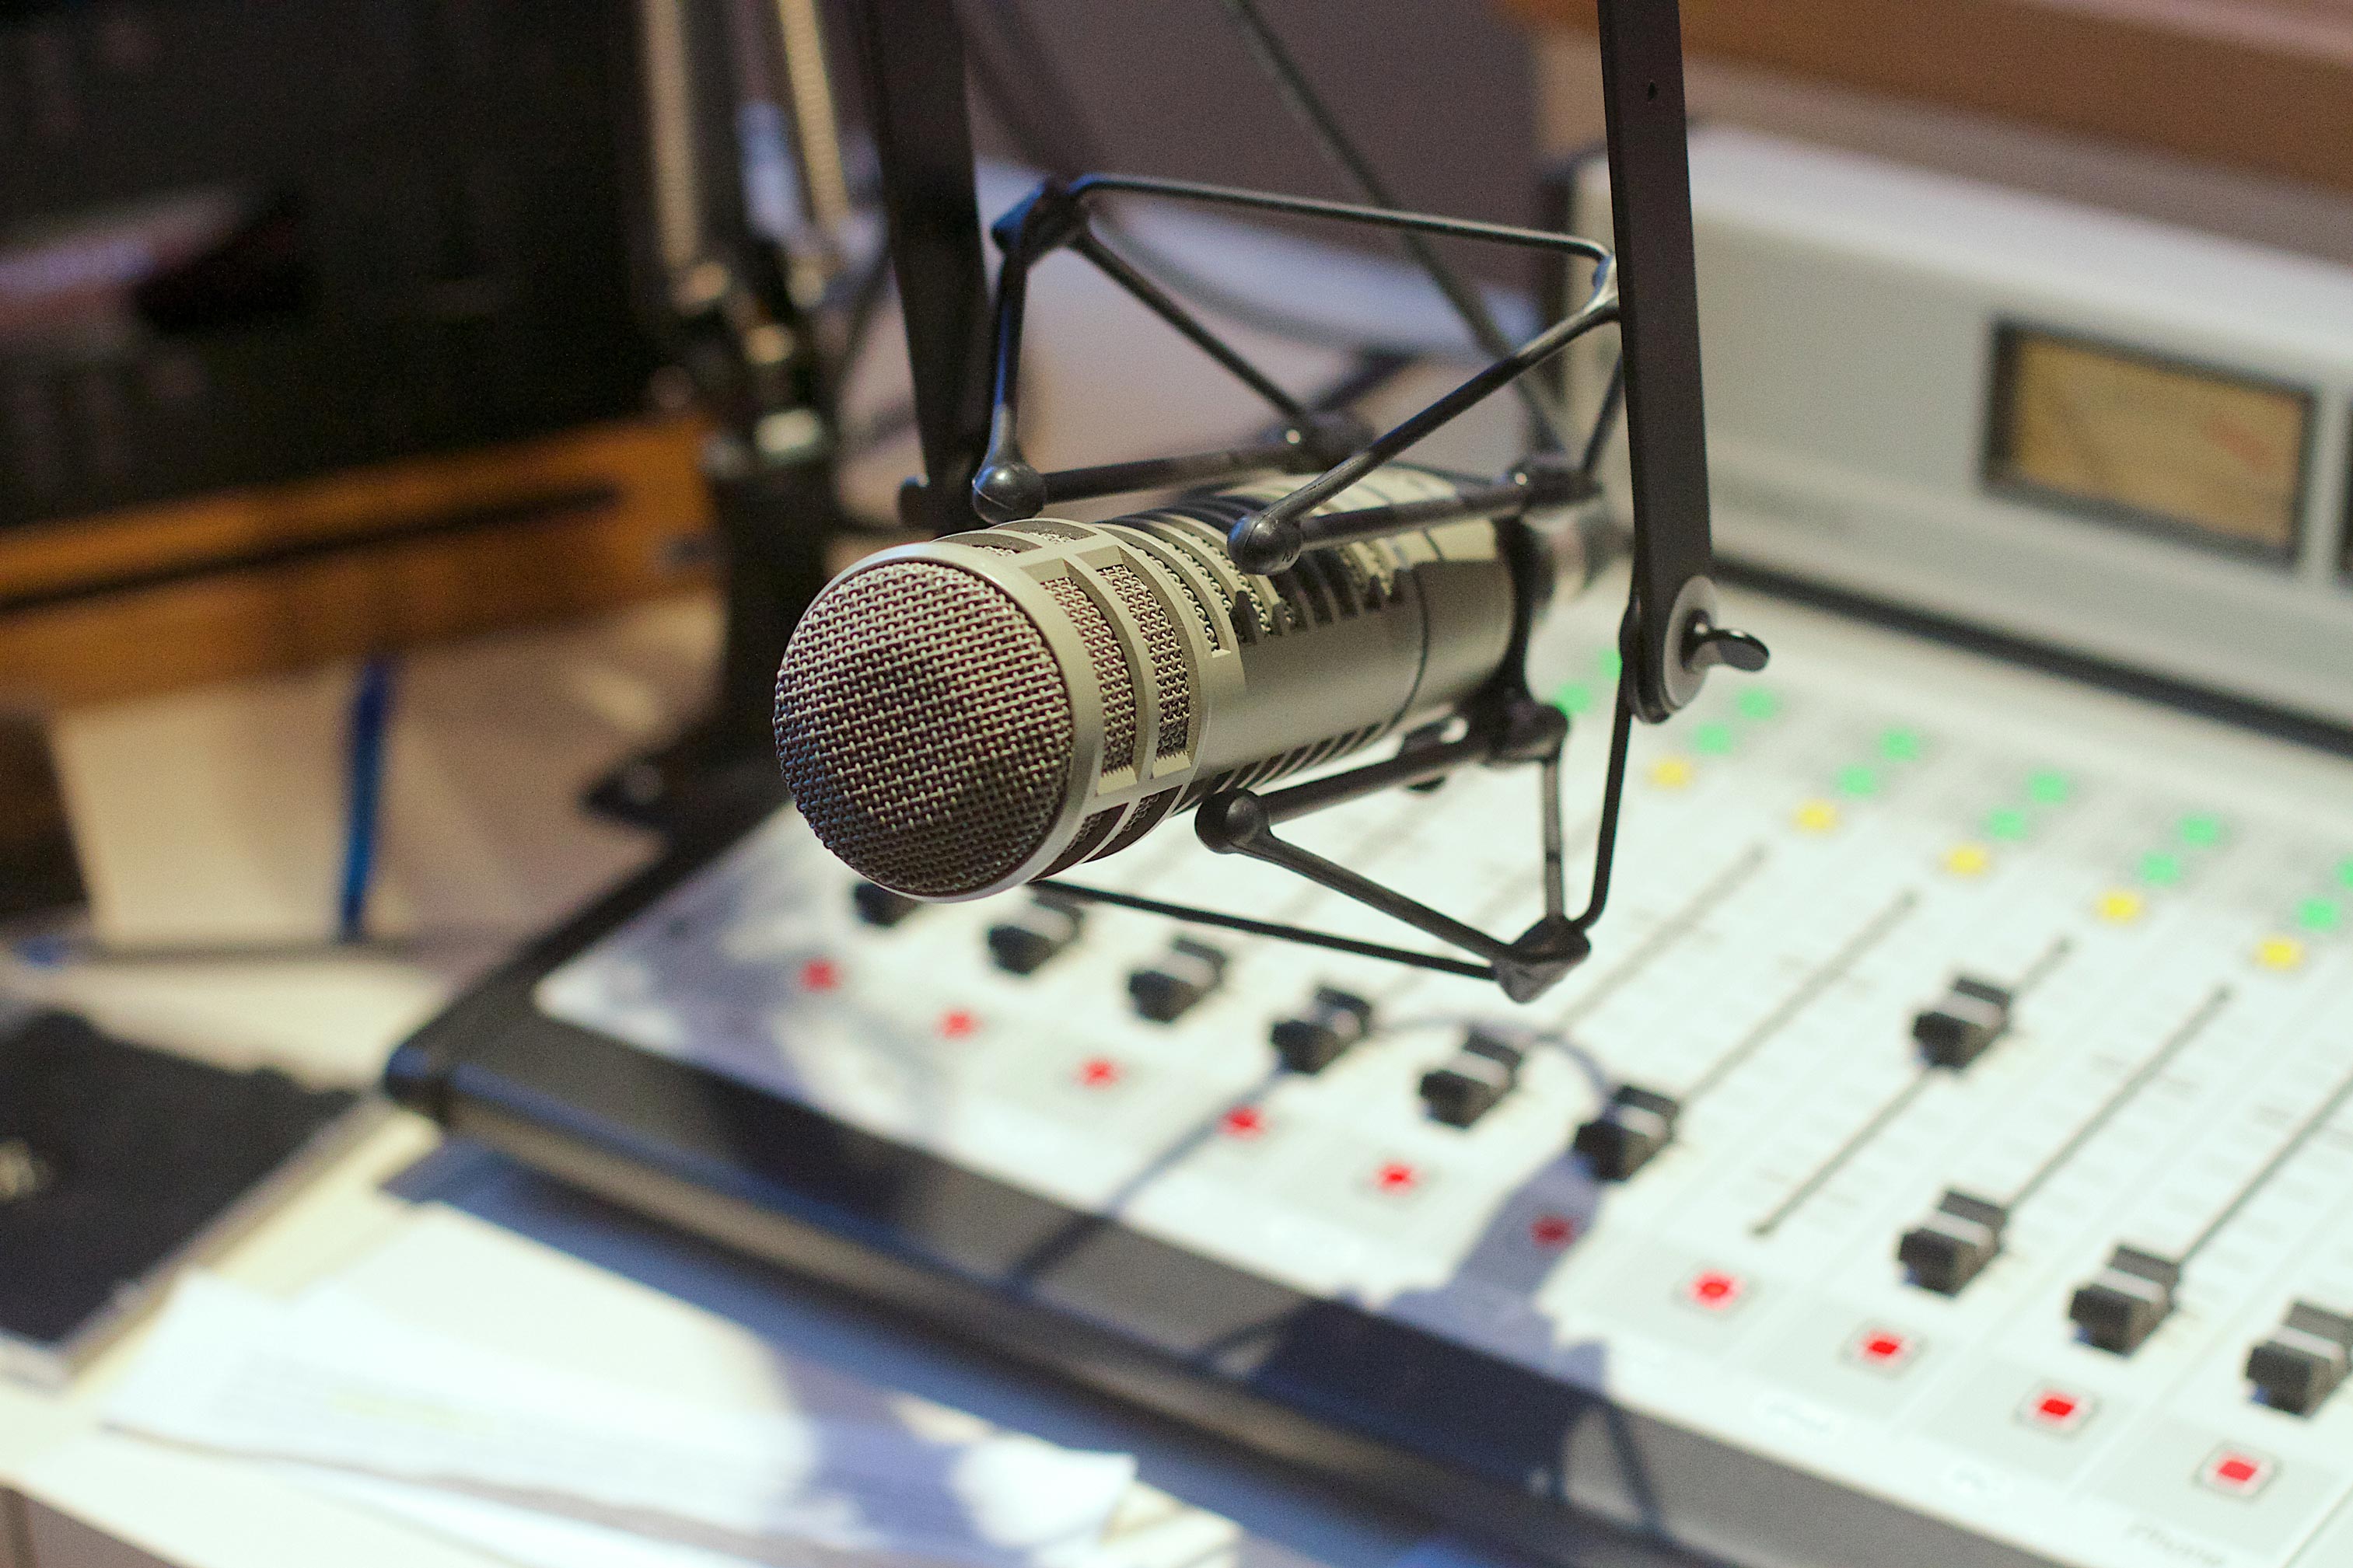 One of the two major Rwandan radio stations, RTLM, provided the most extreme and inflammatory messages.